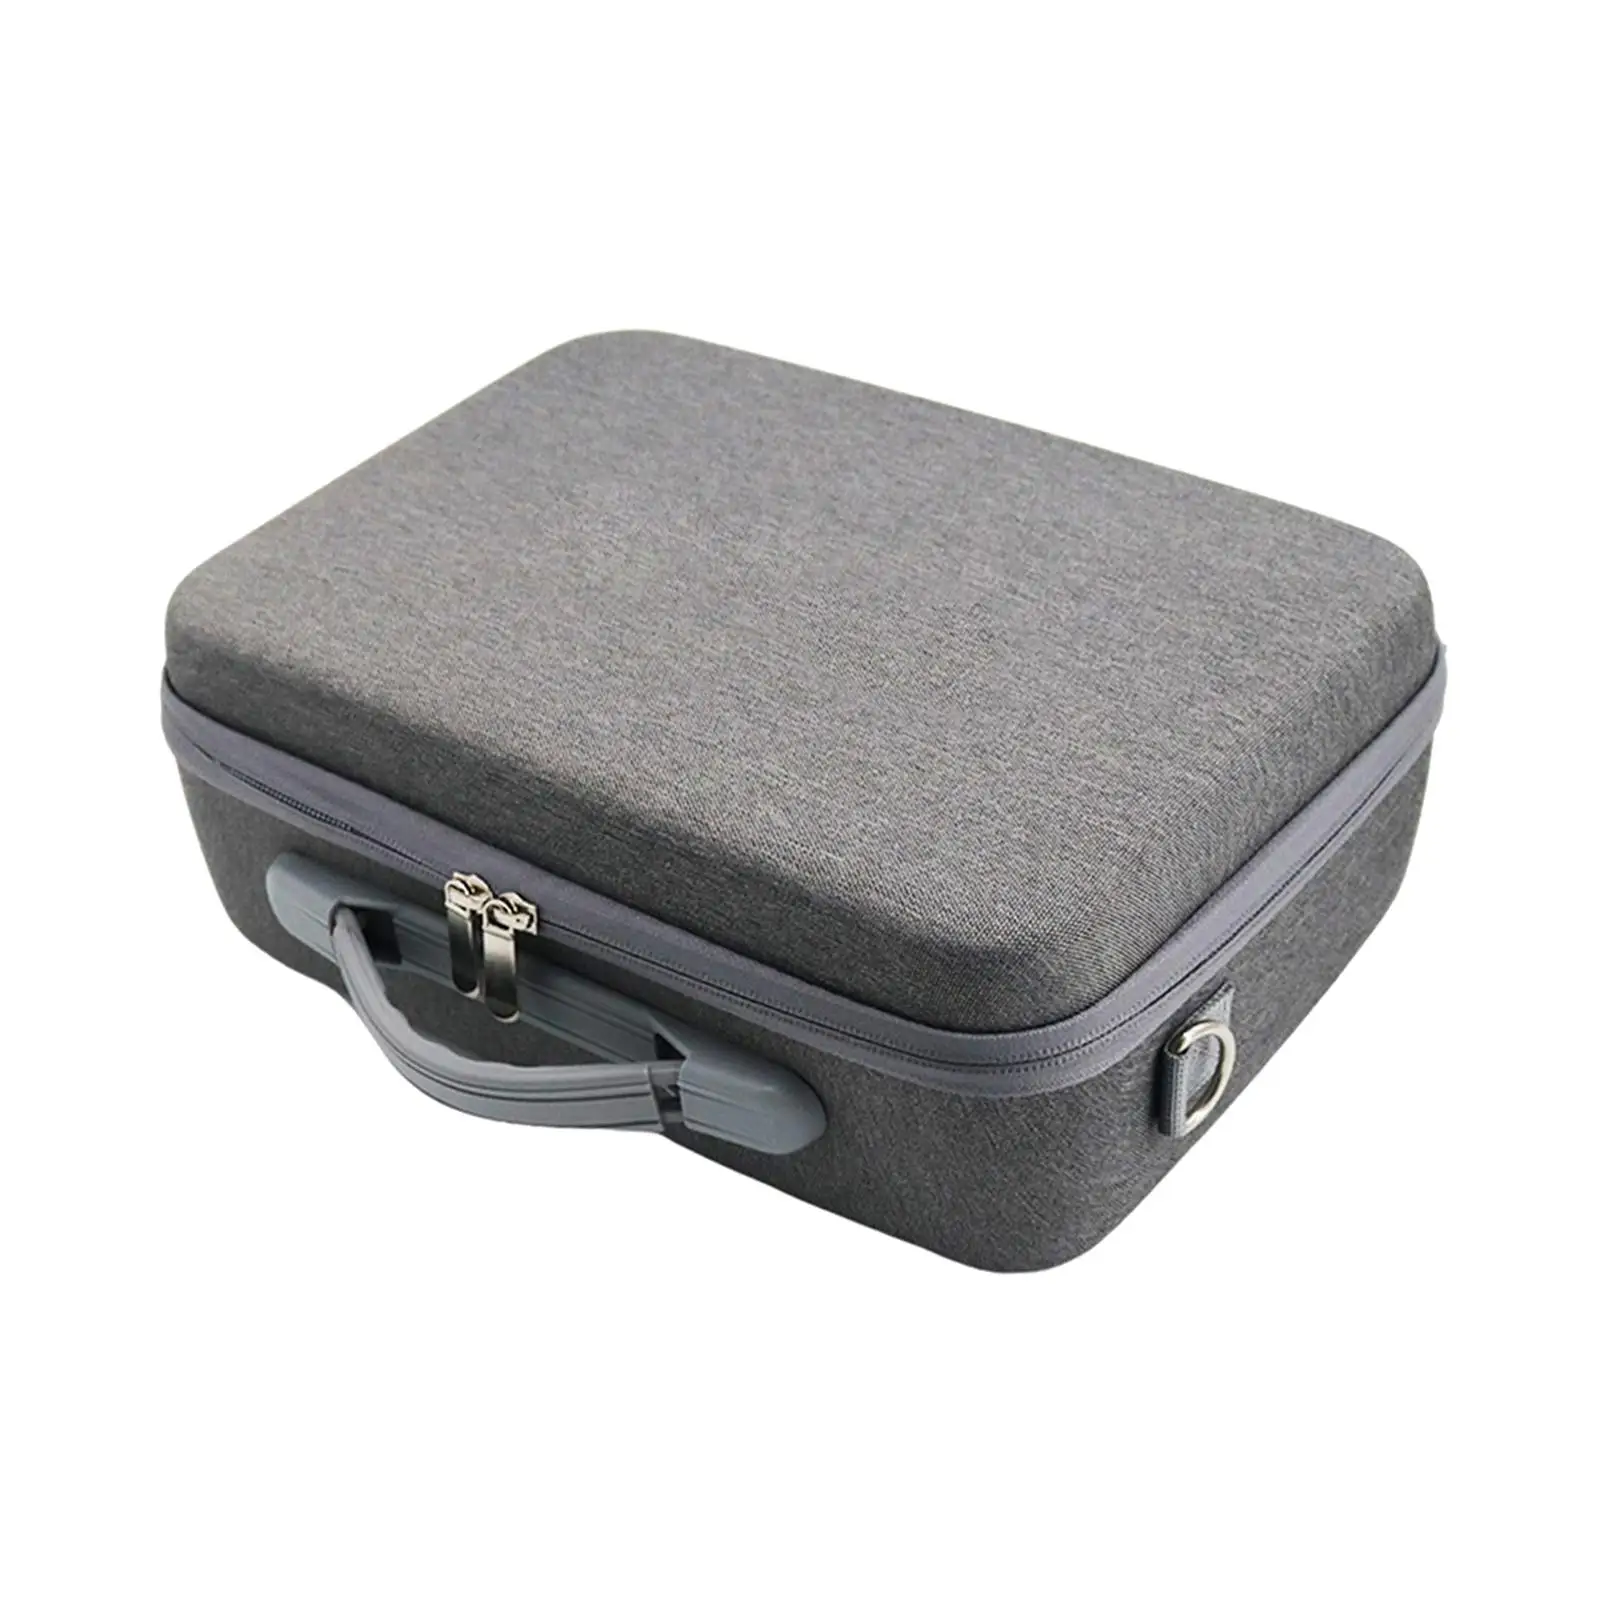 Travel Carrying Case Large Capacity with Removable Shoulder Strap Storage Shoulder Bag Storage Bag for RC Quadcopter Accessories